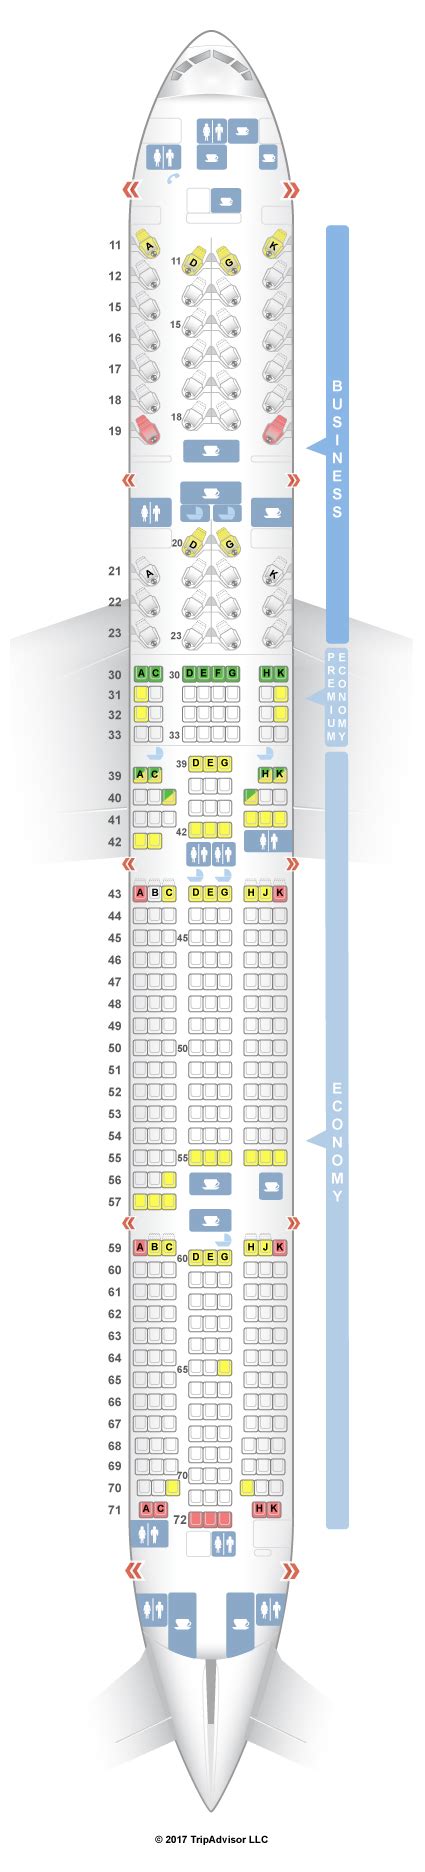 boeing 777-300er seat map cathay pacific